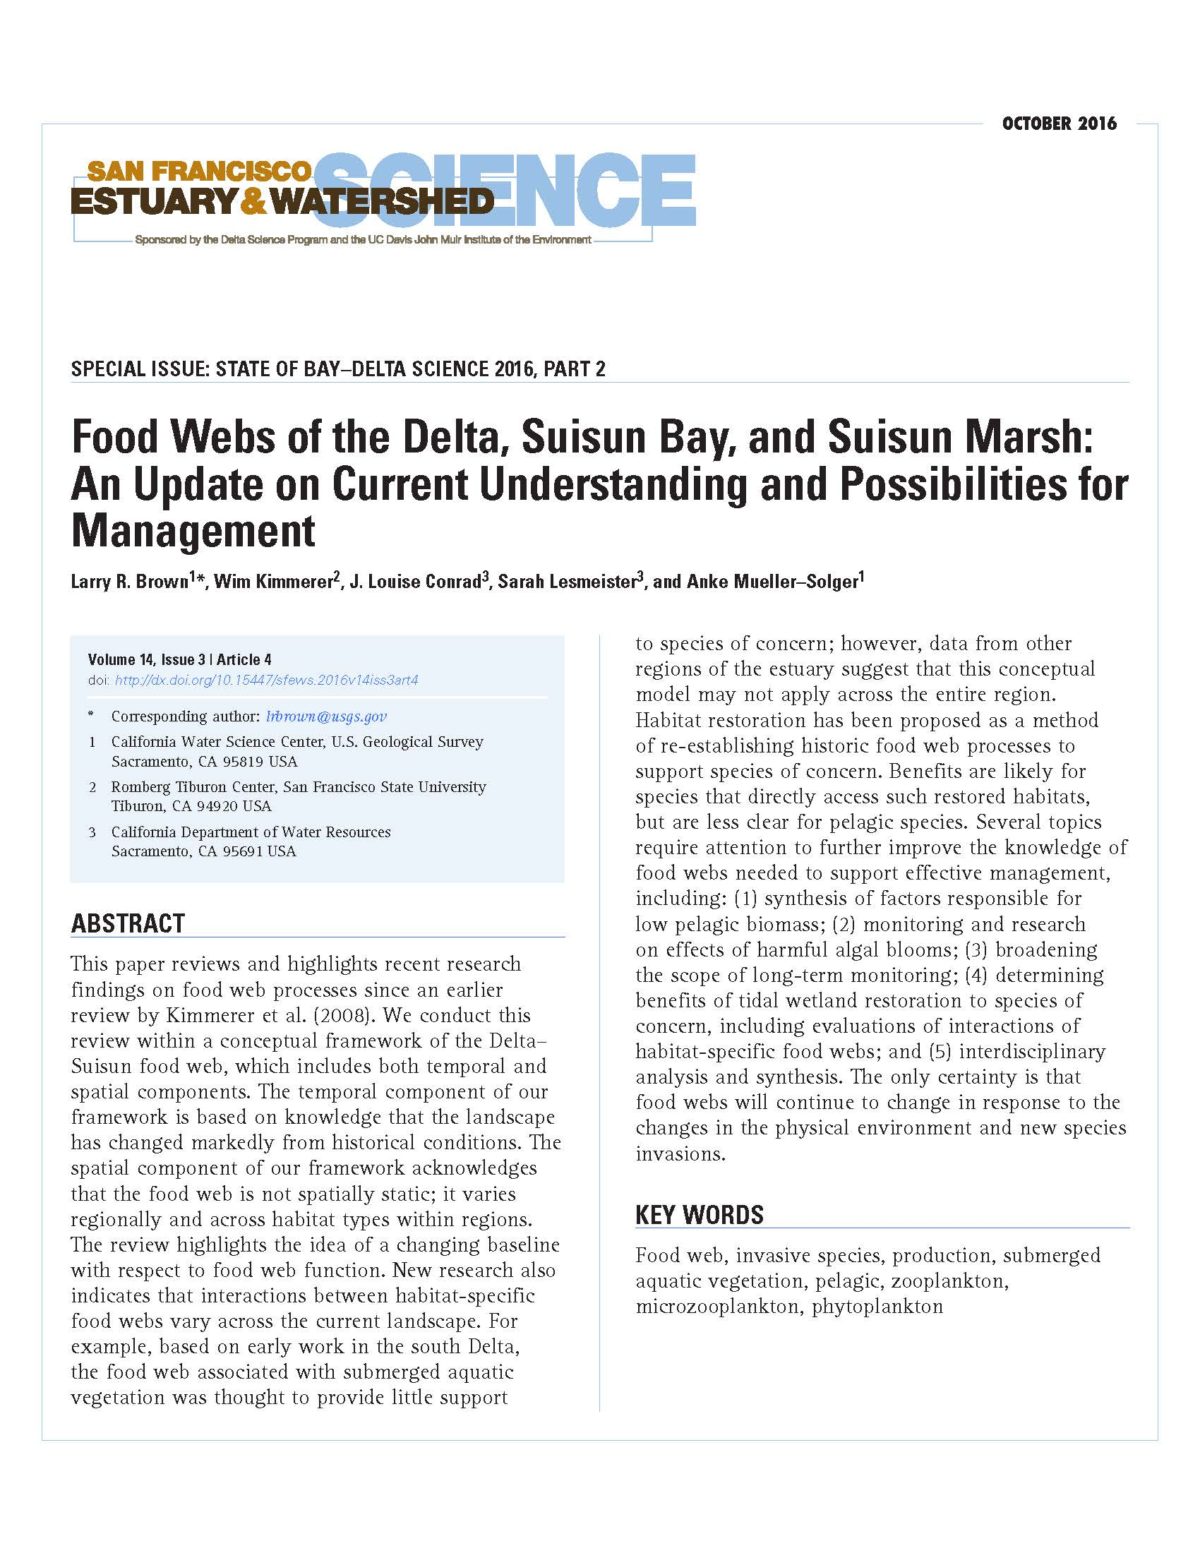 Food Webs of the Delta, Suisun Bay, and Suisun Marsh:  An Update on Current Understanding and Possibilities for Management